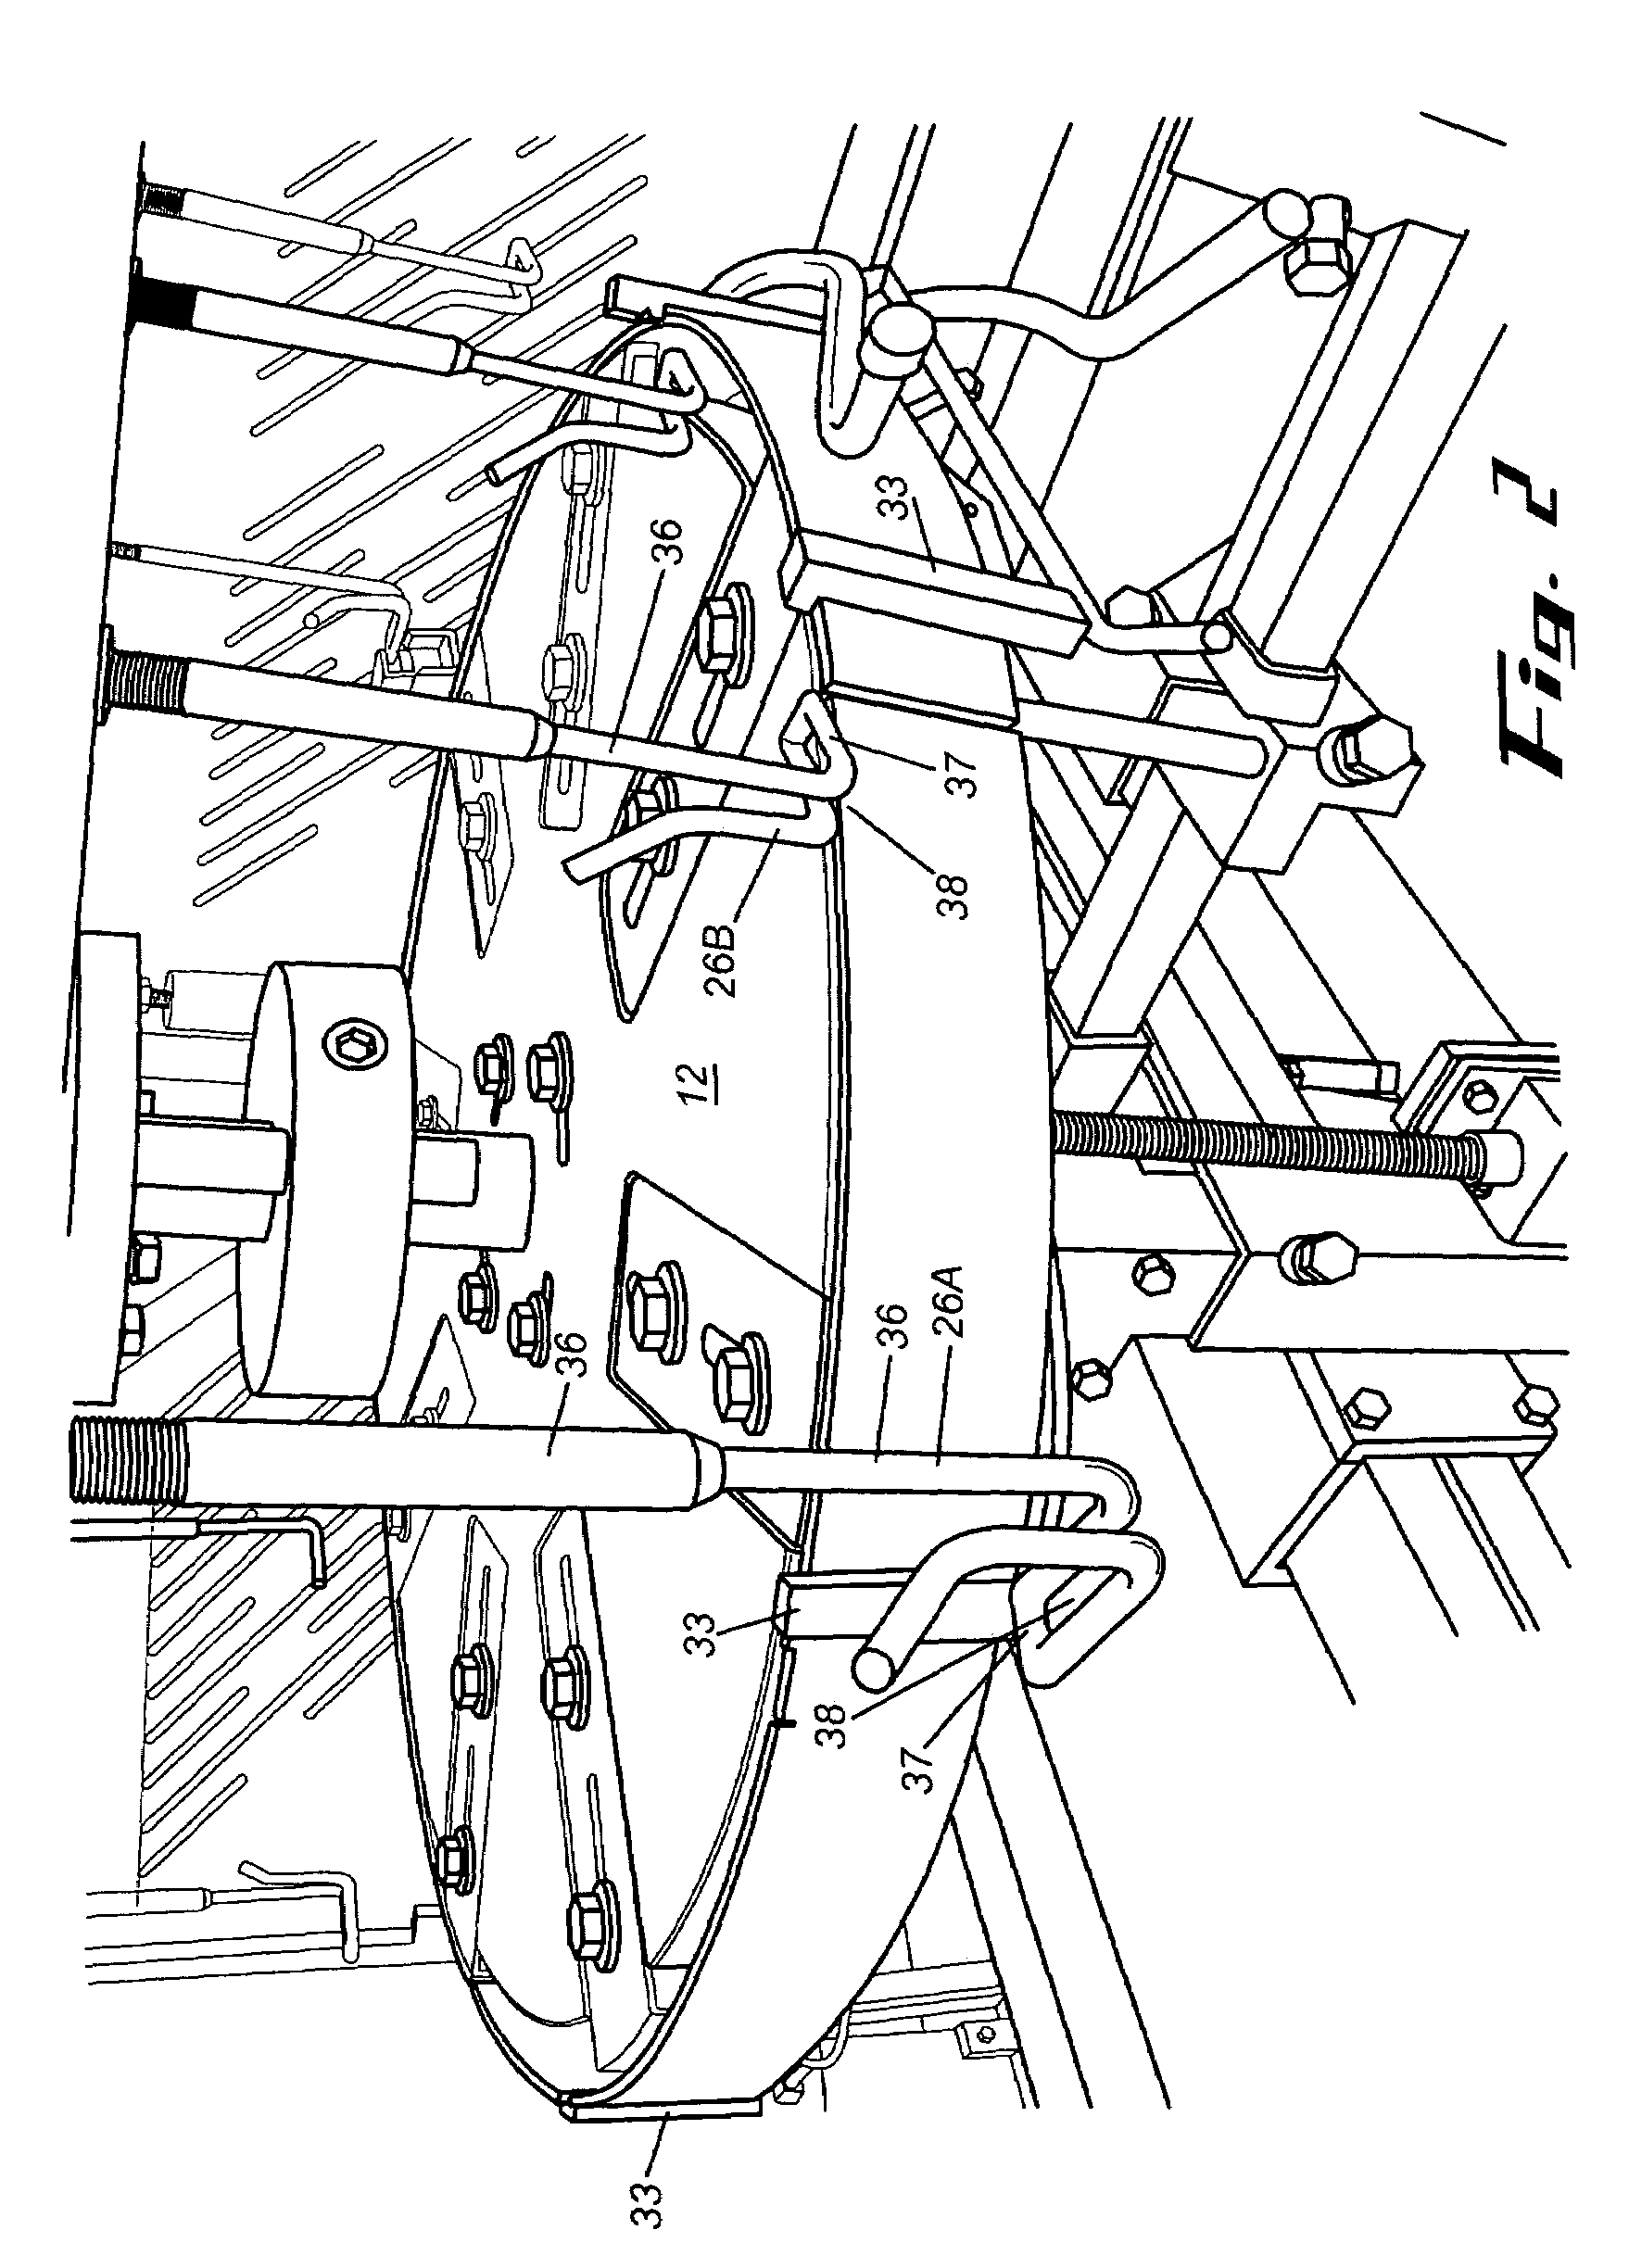 Poultry wing separator and partial deboner